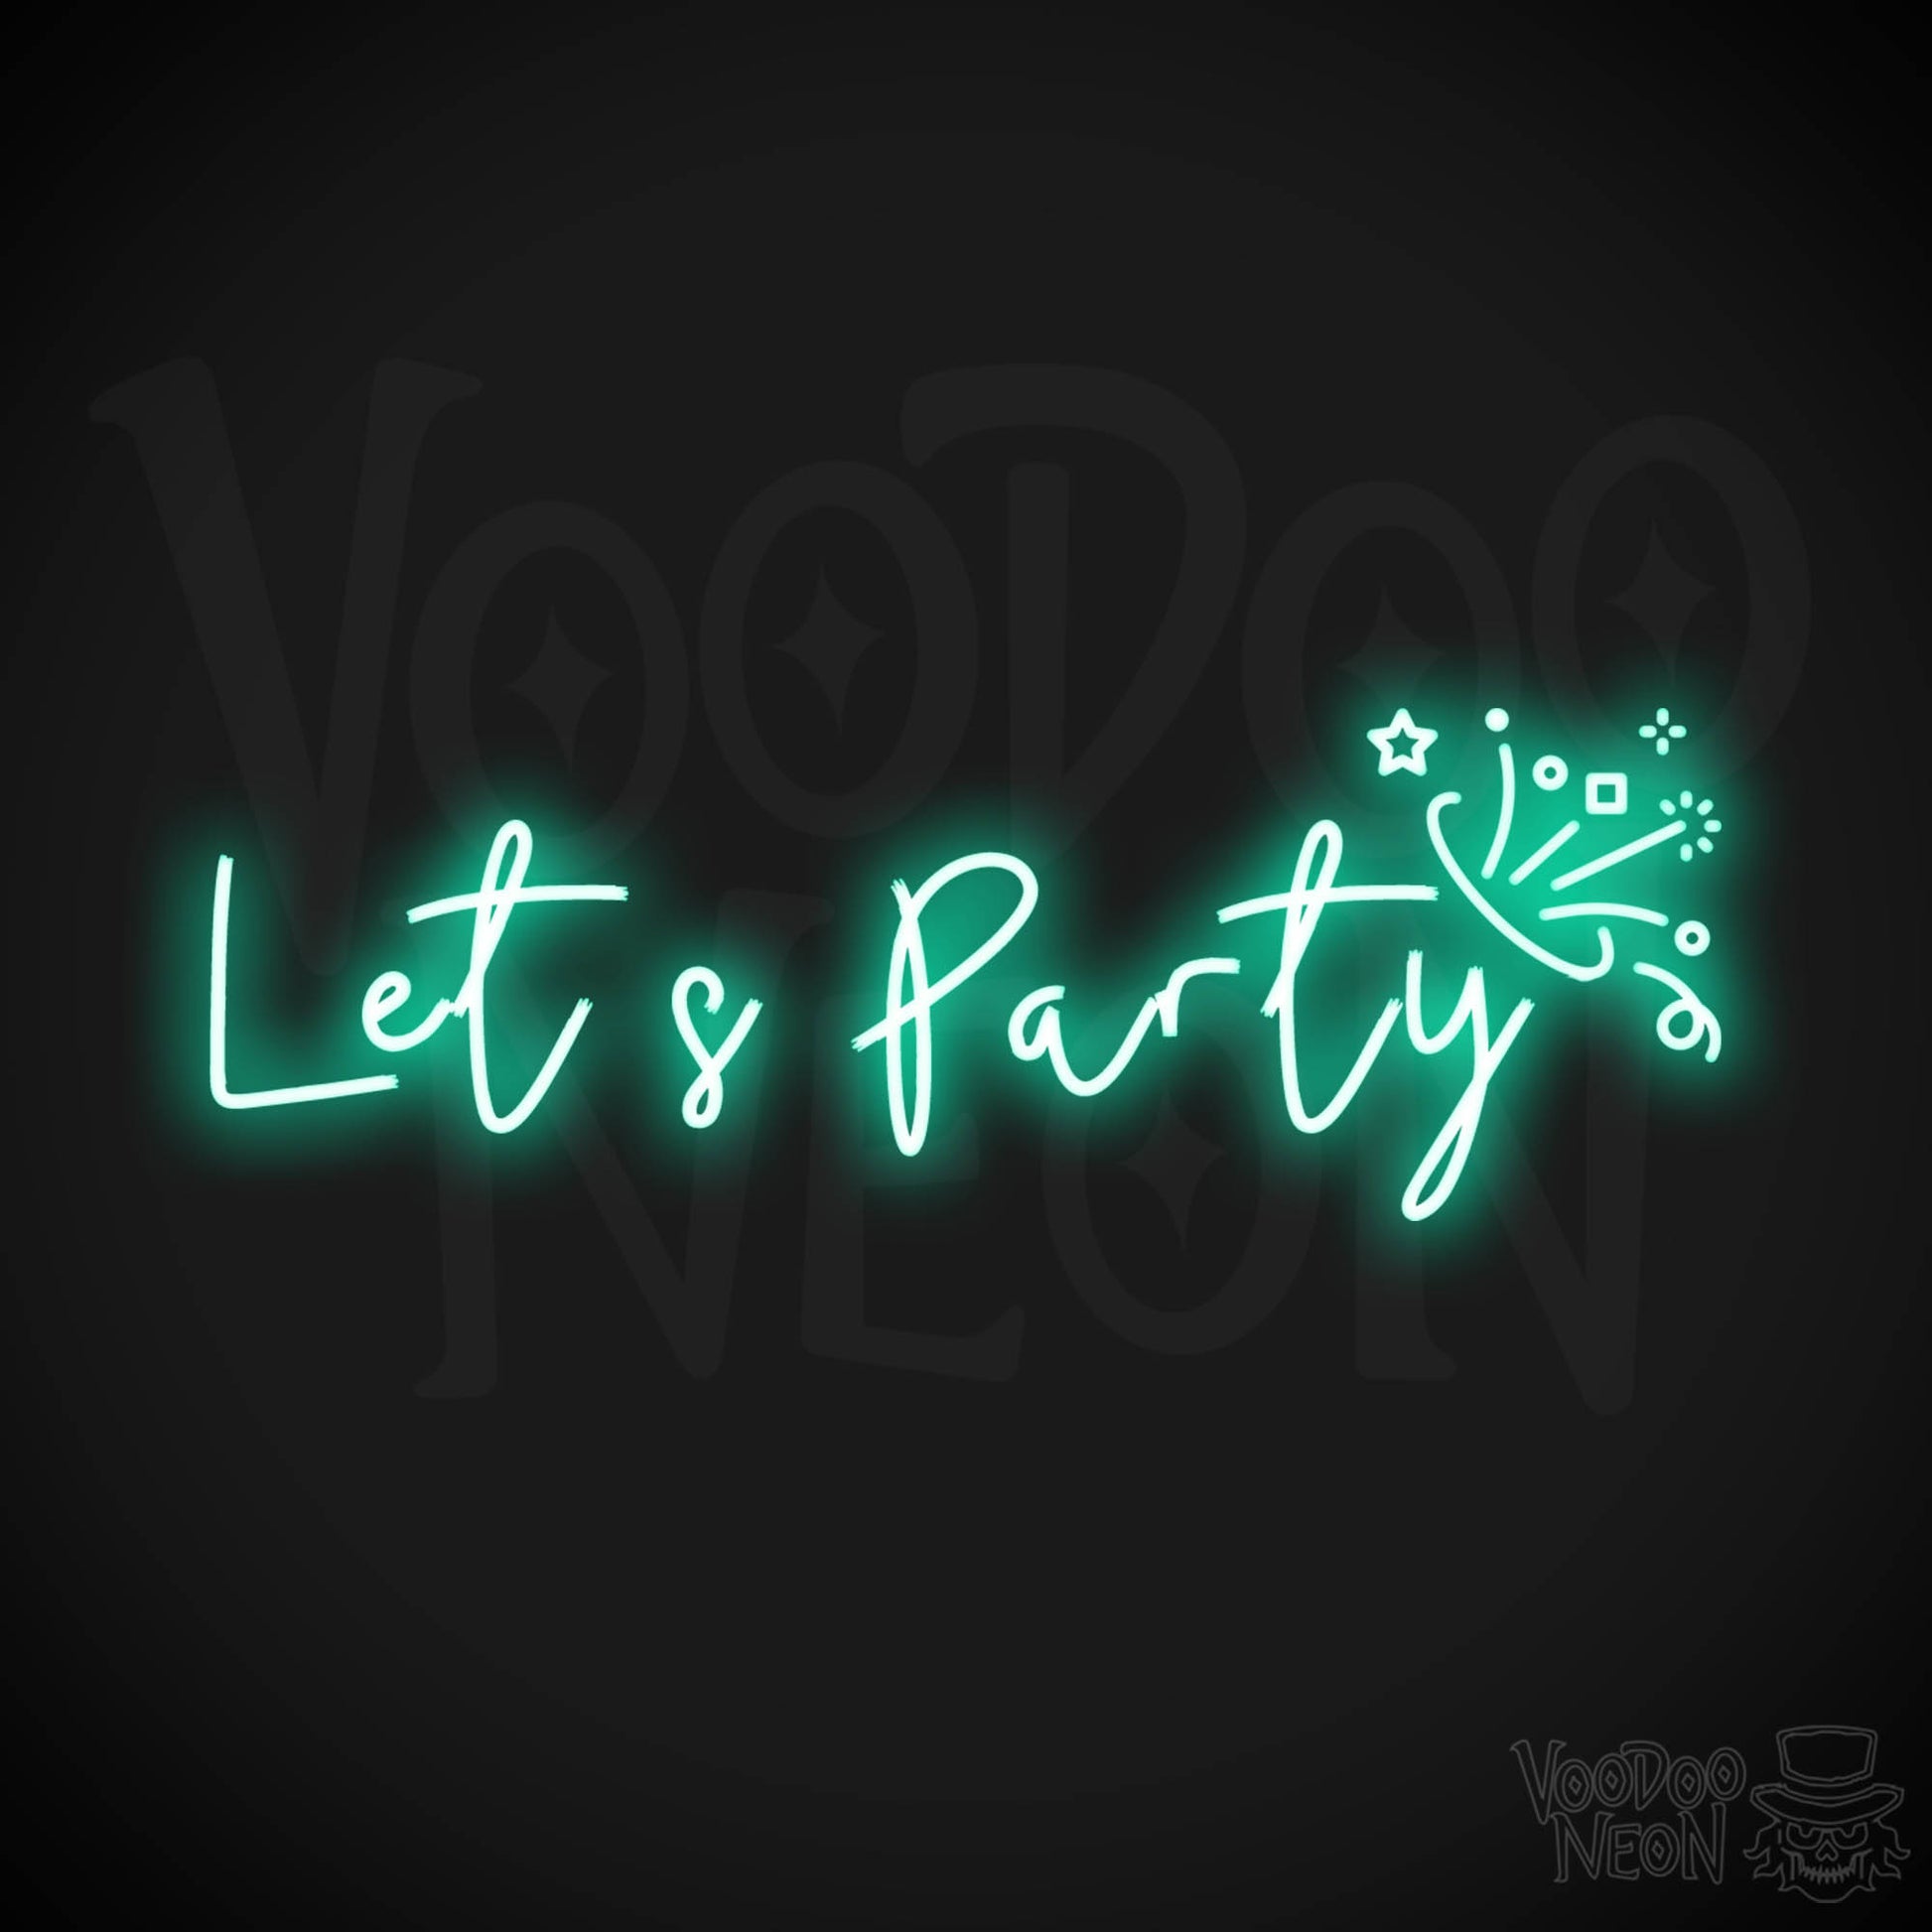 Let's Party Neon Sign - Neon Let's Party Sign - Bar LED Sign - Color Light Green